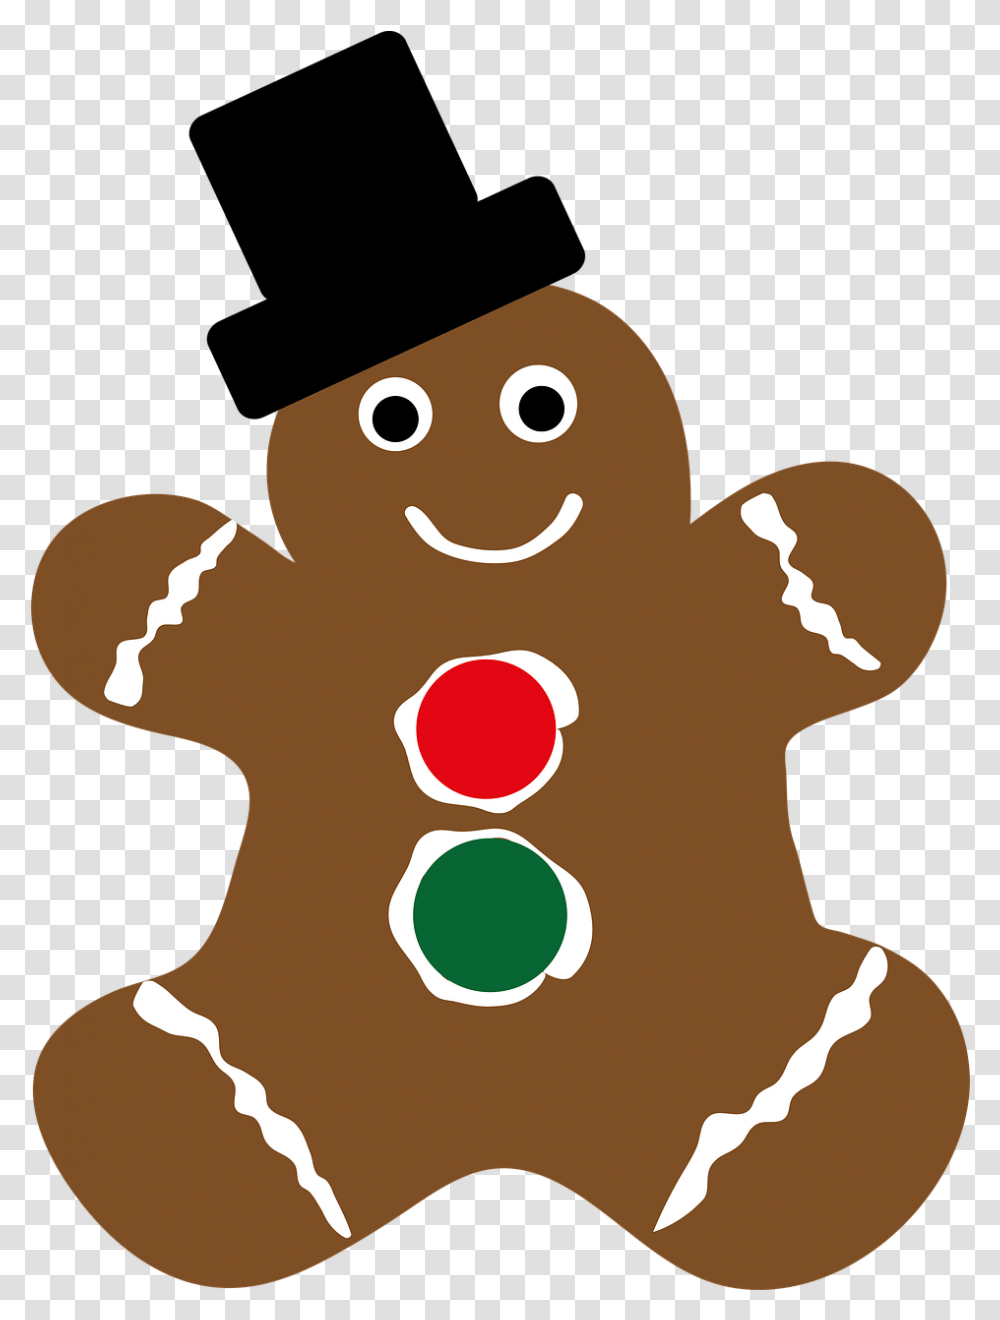 Gingerbread Christmas Cookie Free Image On Pixabay Dessin Pain D Pice Nol, Food, Biscuit, Sweets, Snowman Transparent Png